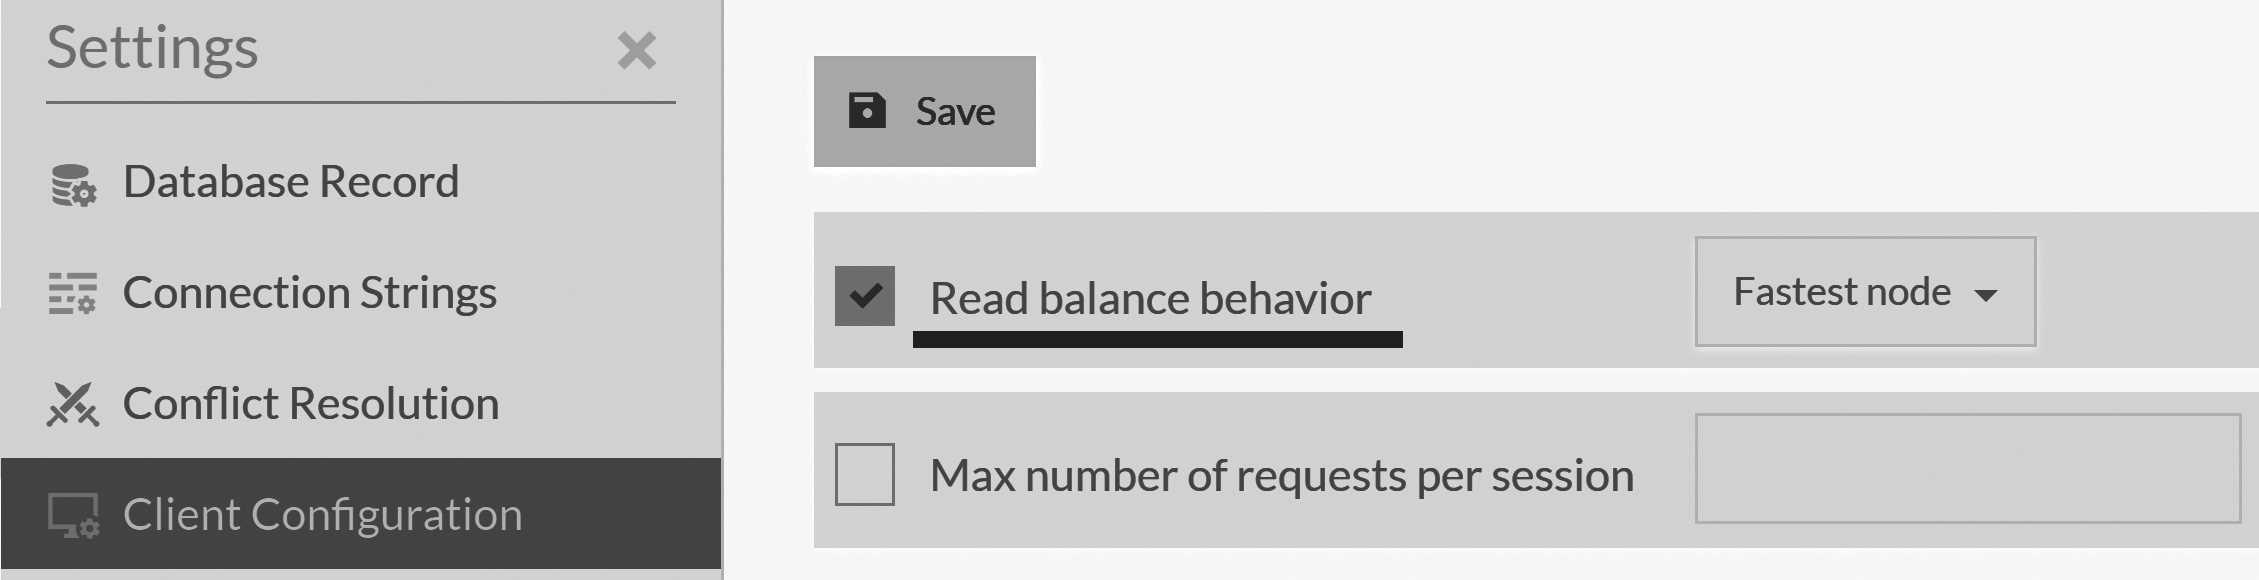 Configuring client read balancing behavior from the server side